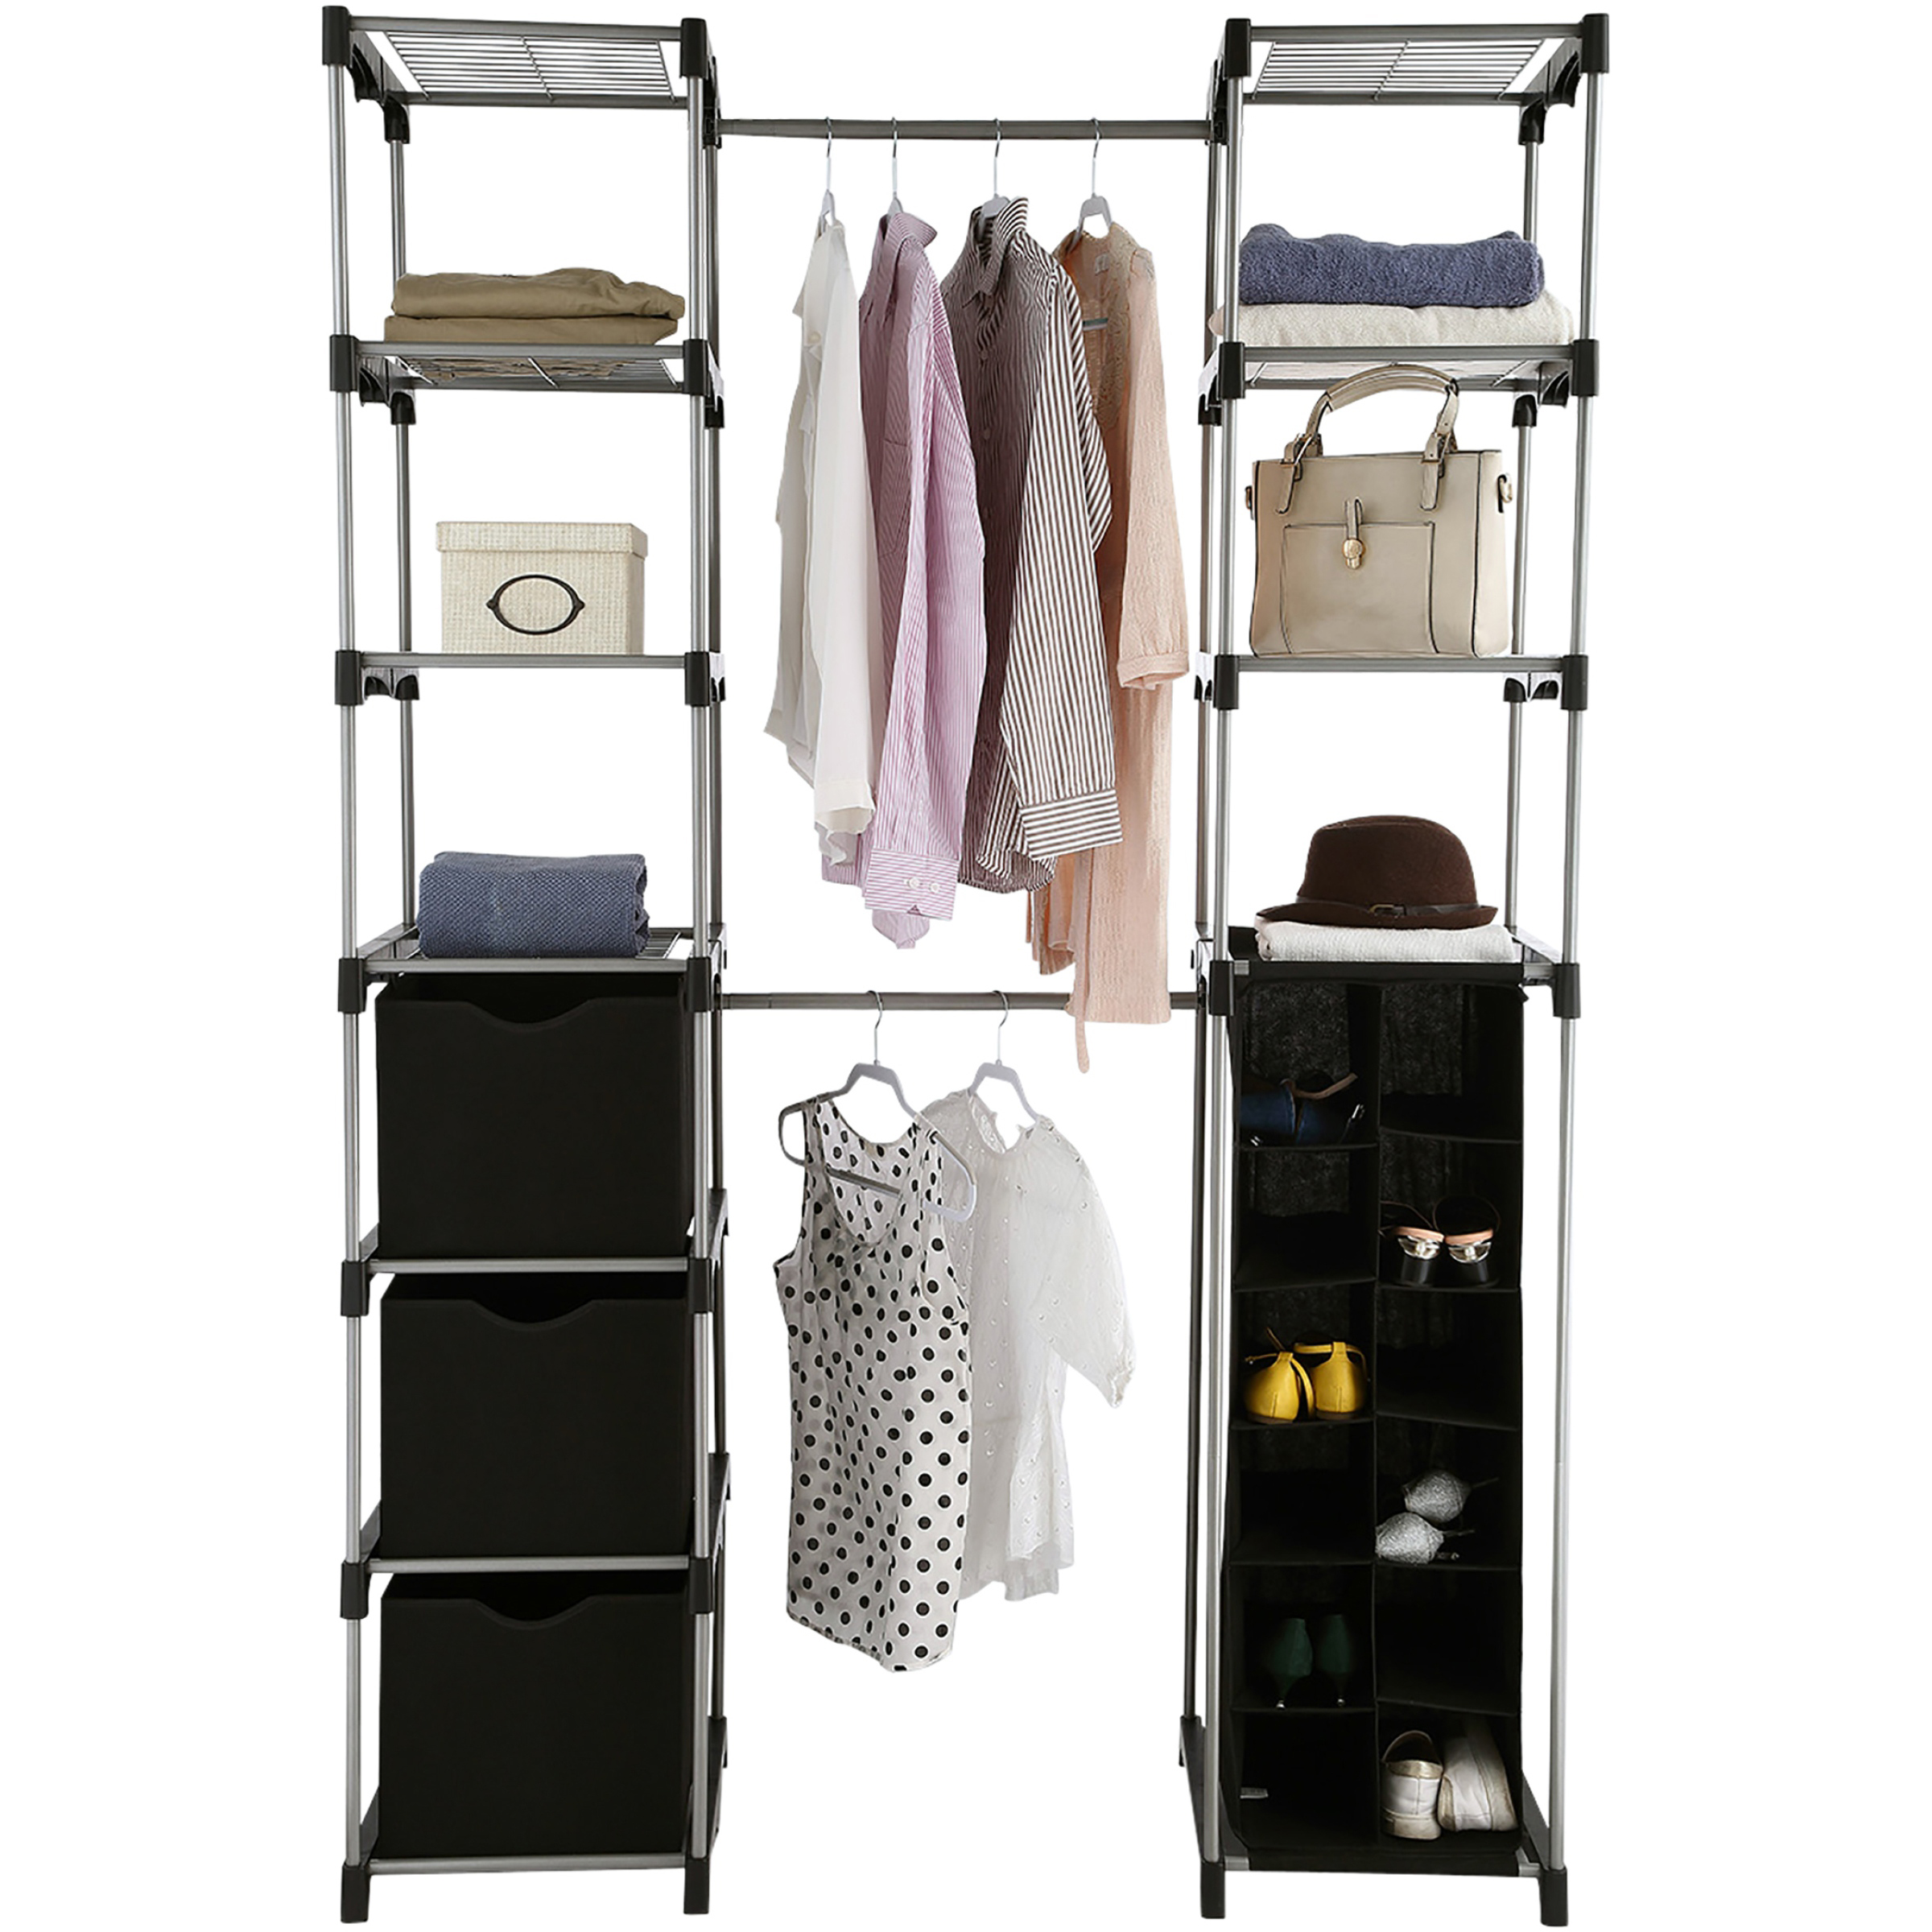 Mainstays  Non-Woven Closet Organizer, 2-Tower 9-Shelves, Easy to Assemble, Black - image 1 of 6